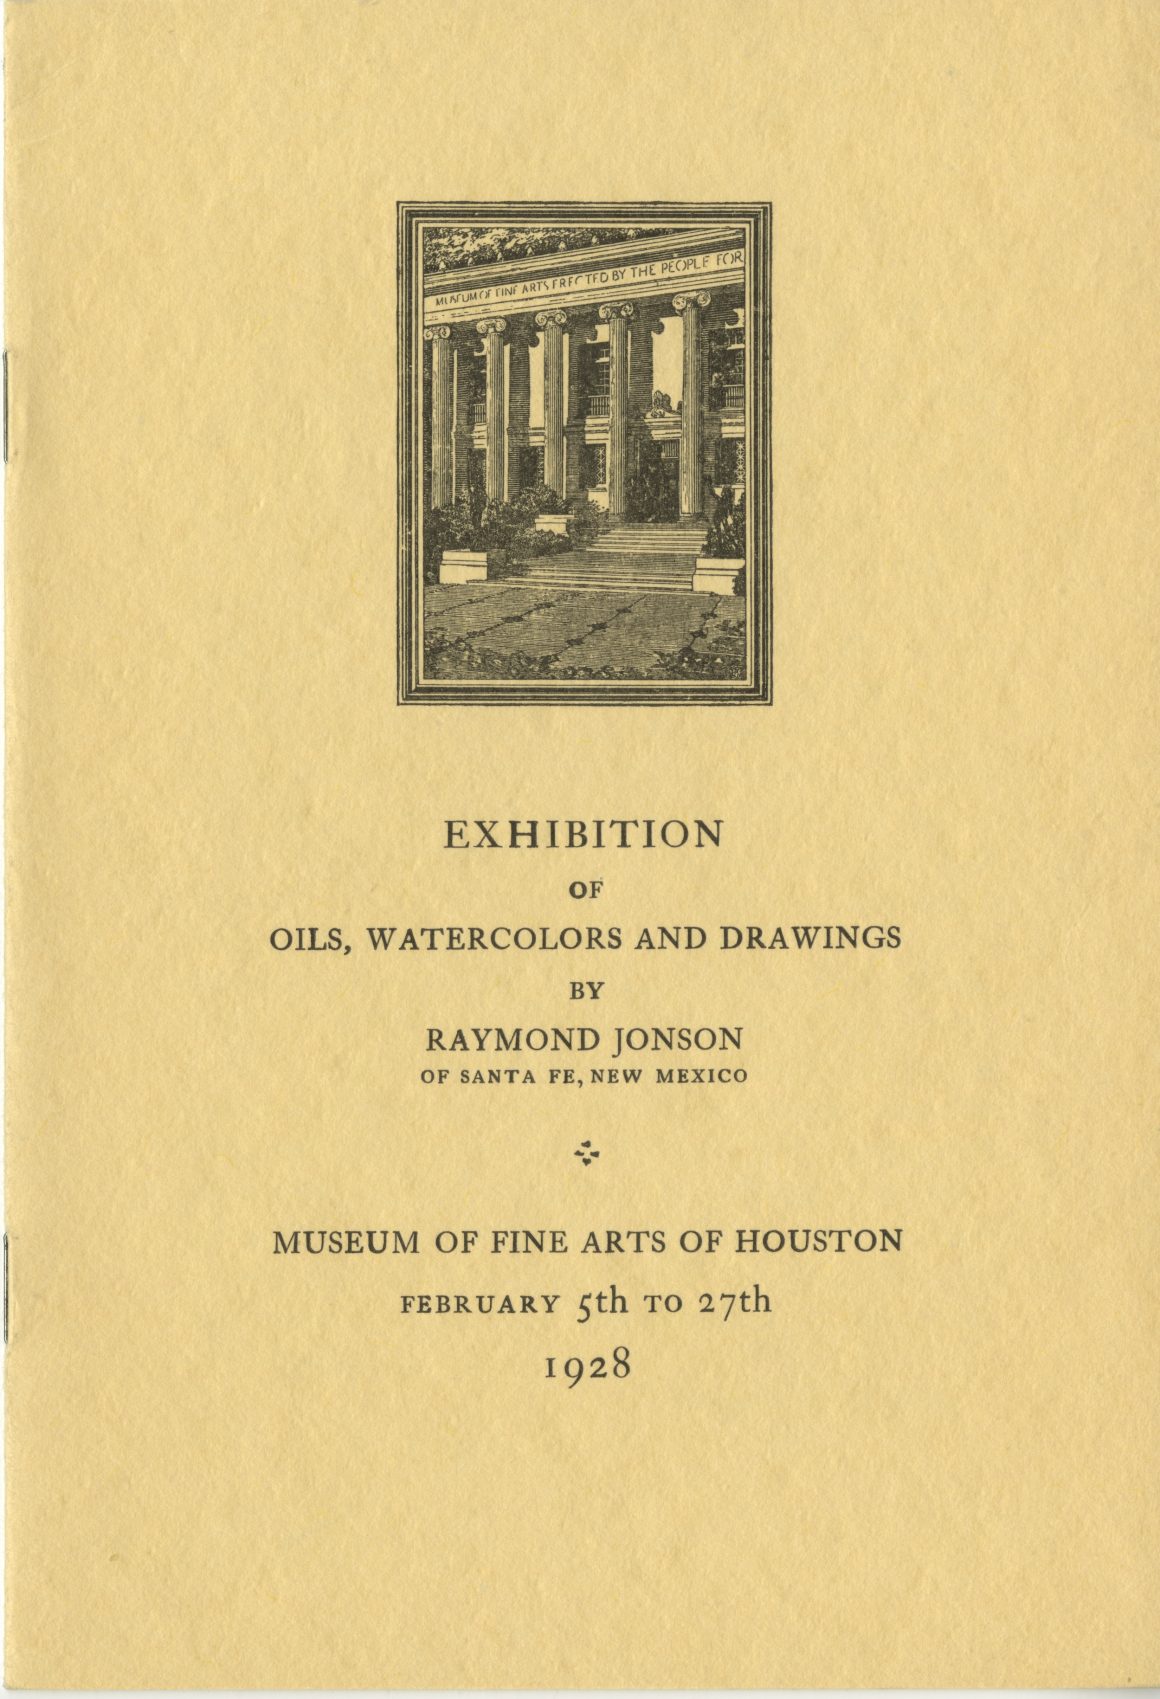 Brochure for Exhibition of Oils, Watercolors and Drawings by RaymondJonson at the Museum of Fine Arts of Houston, February 5th to 27th, 1928.